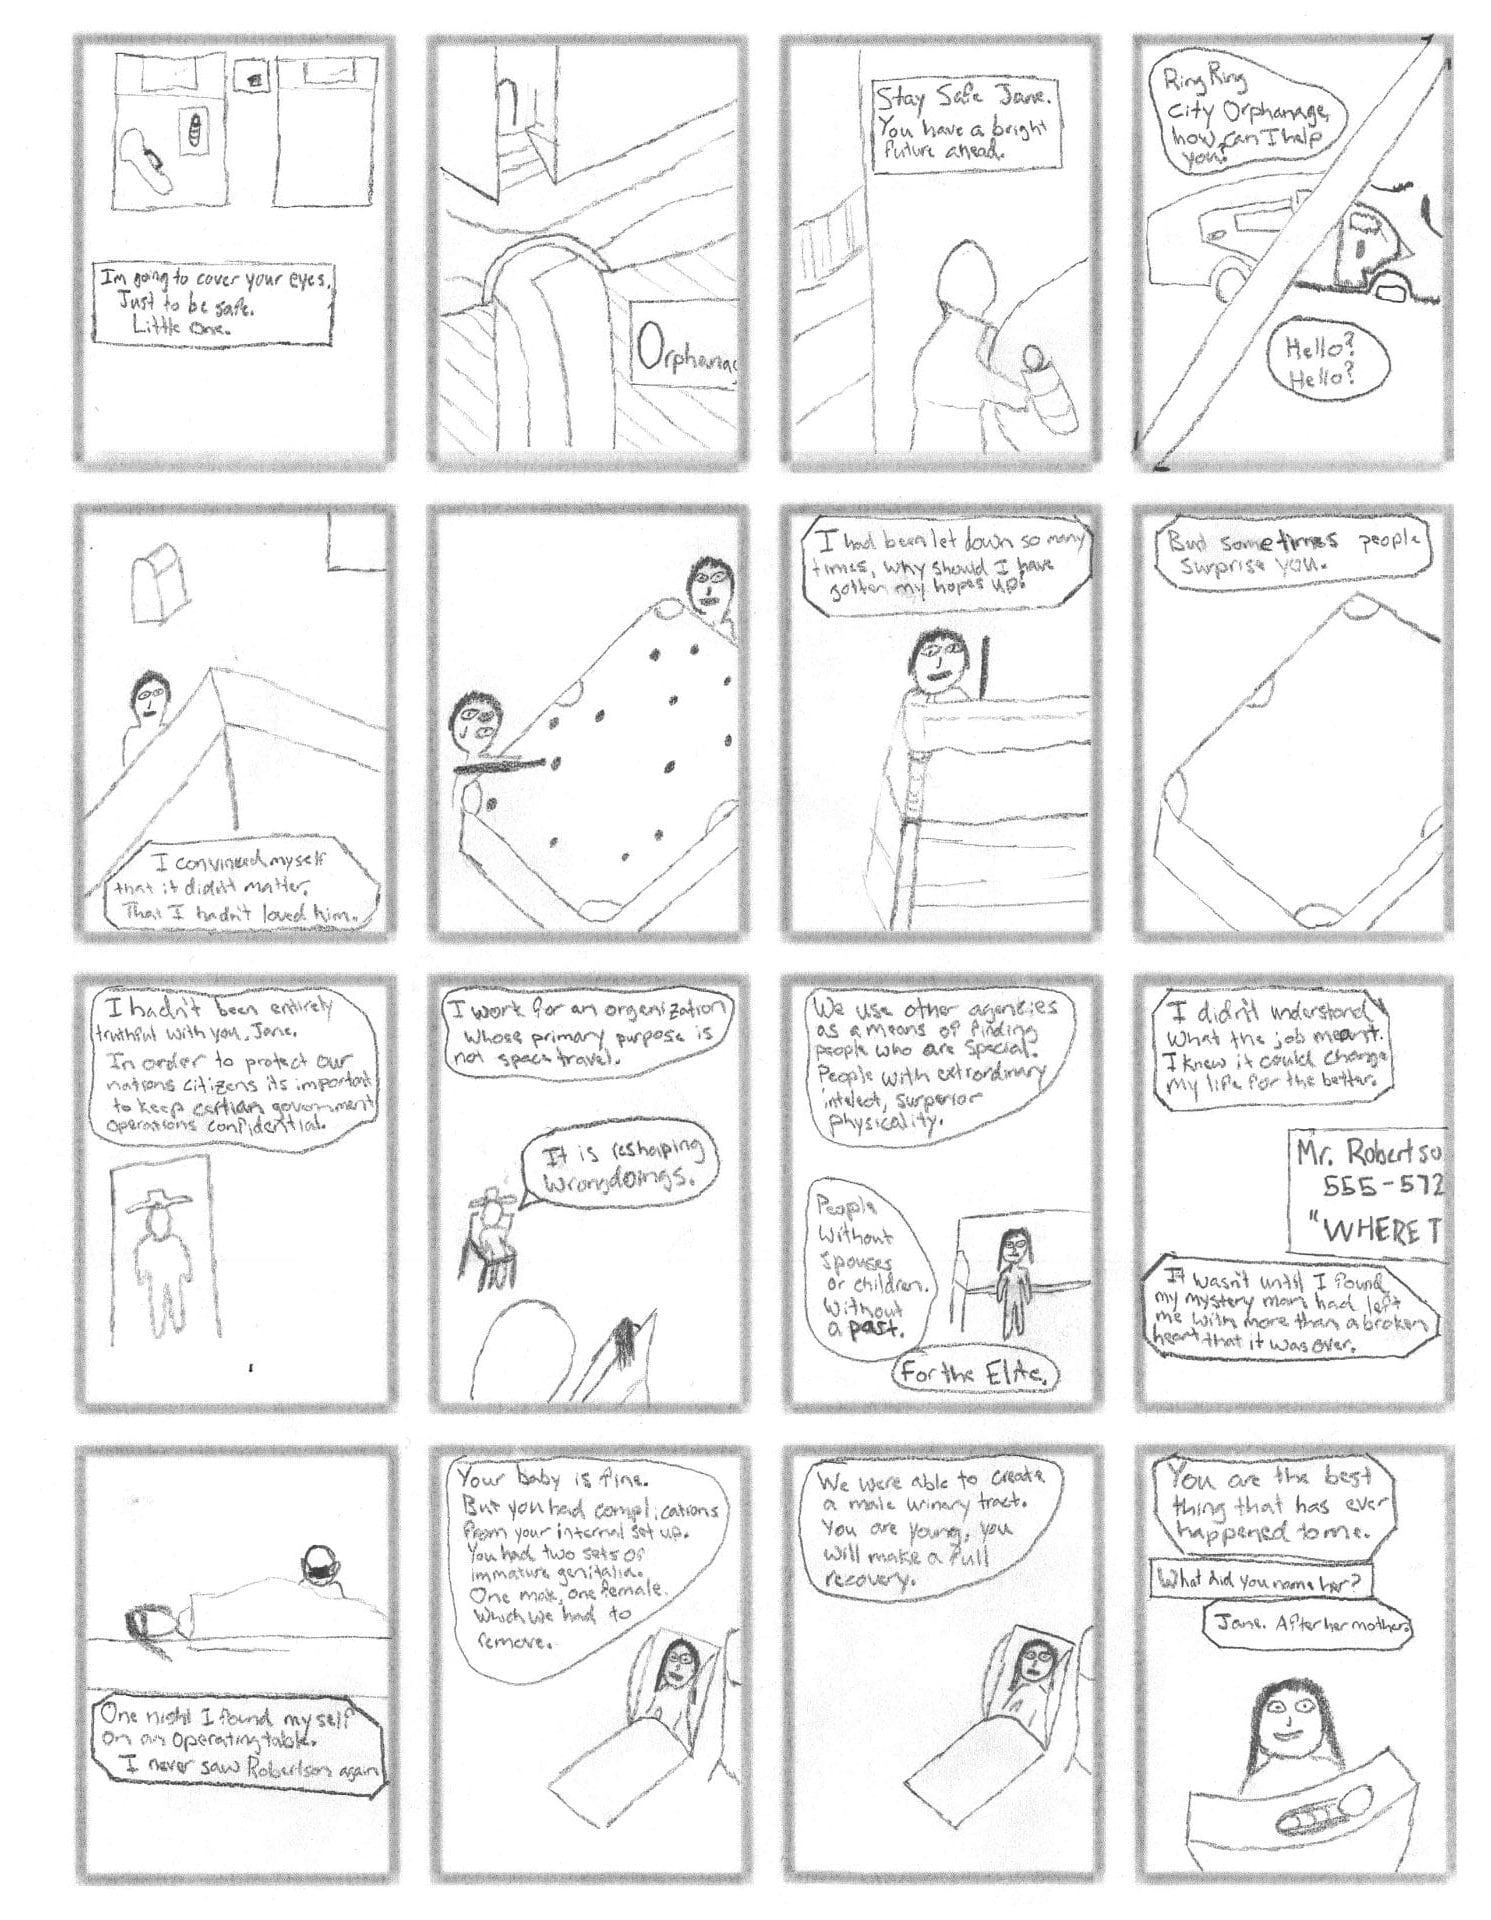 D. Wilen - Comic Page 2 - We find out that the space program is actually a revenge program, and then the main character gets hospitalized due to pregnancy complications and the baby is fine, but the girl's female parts are removed and the men's parts remain.